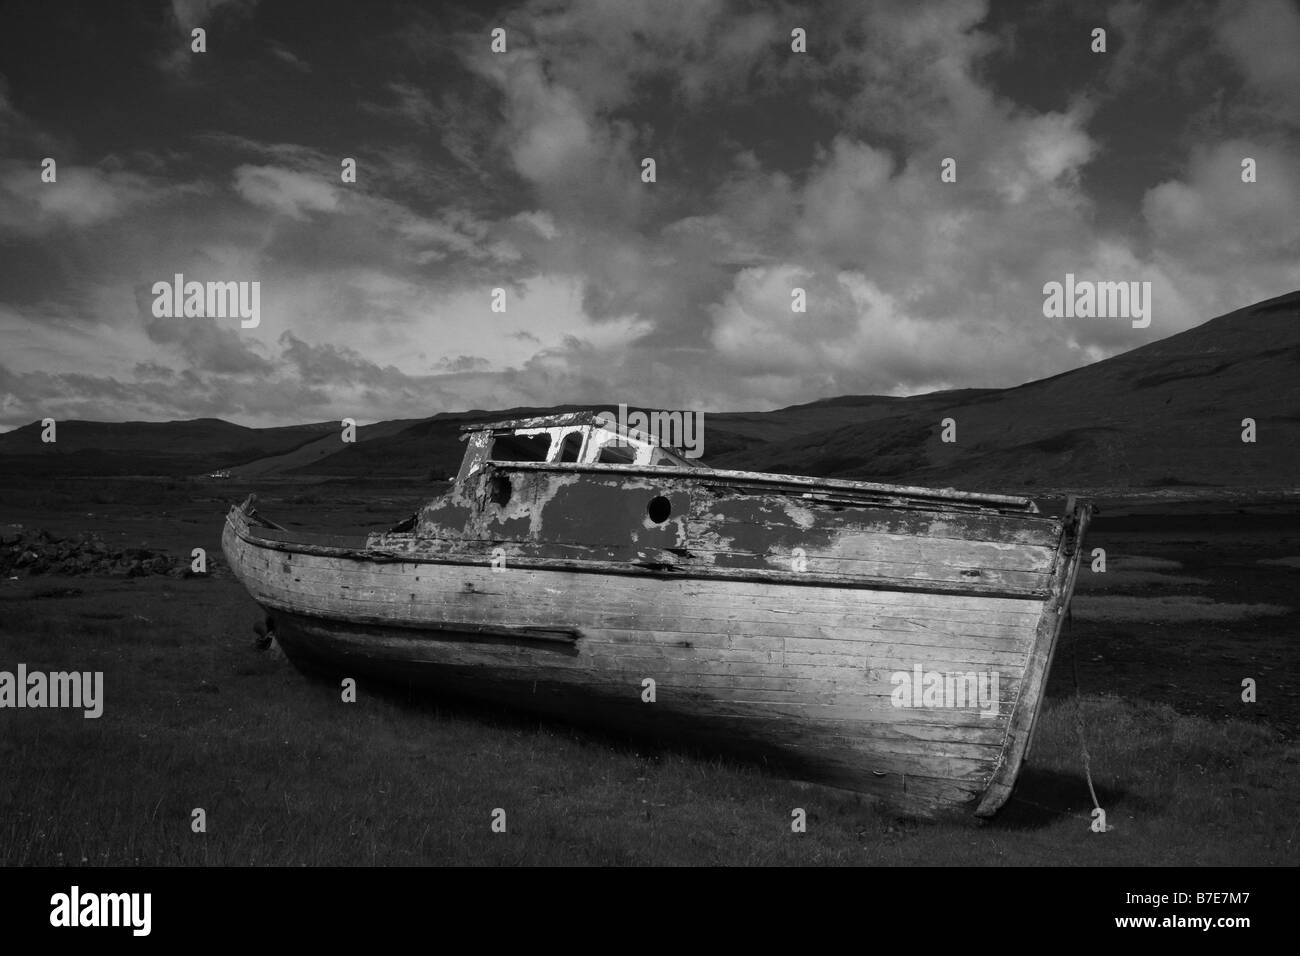 An abandoned fishing boat on loch Scridain, Isle of Mull, Inner Hebrides, Scotland Stock Photo